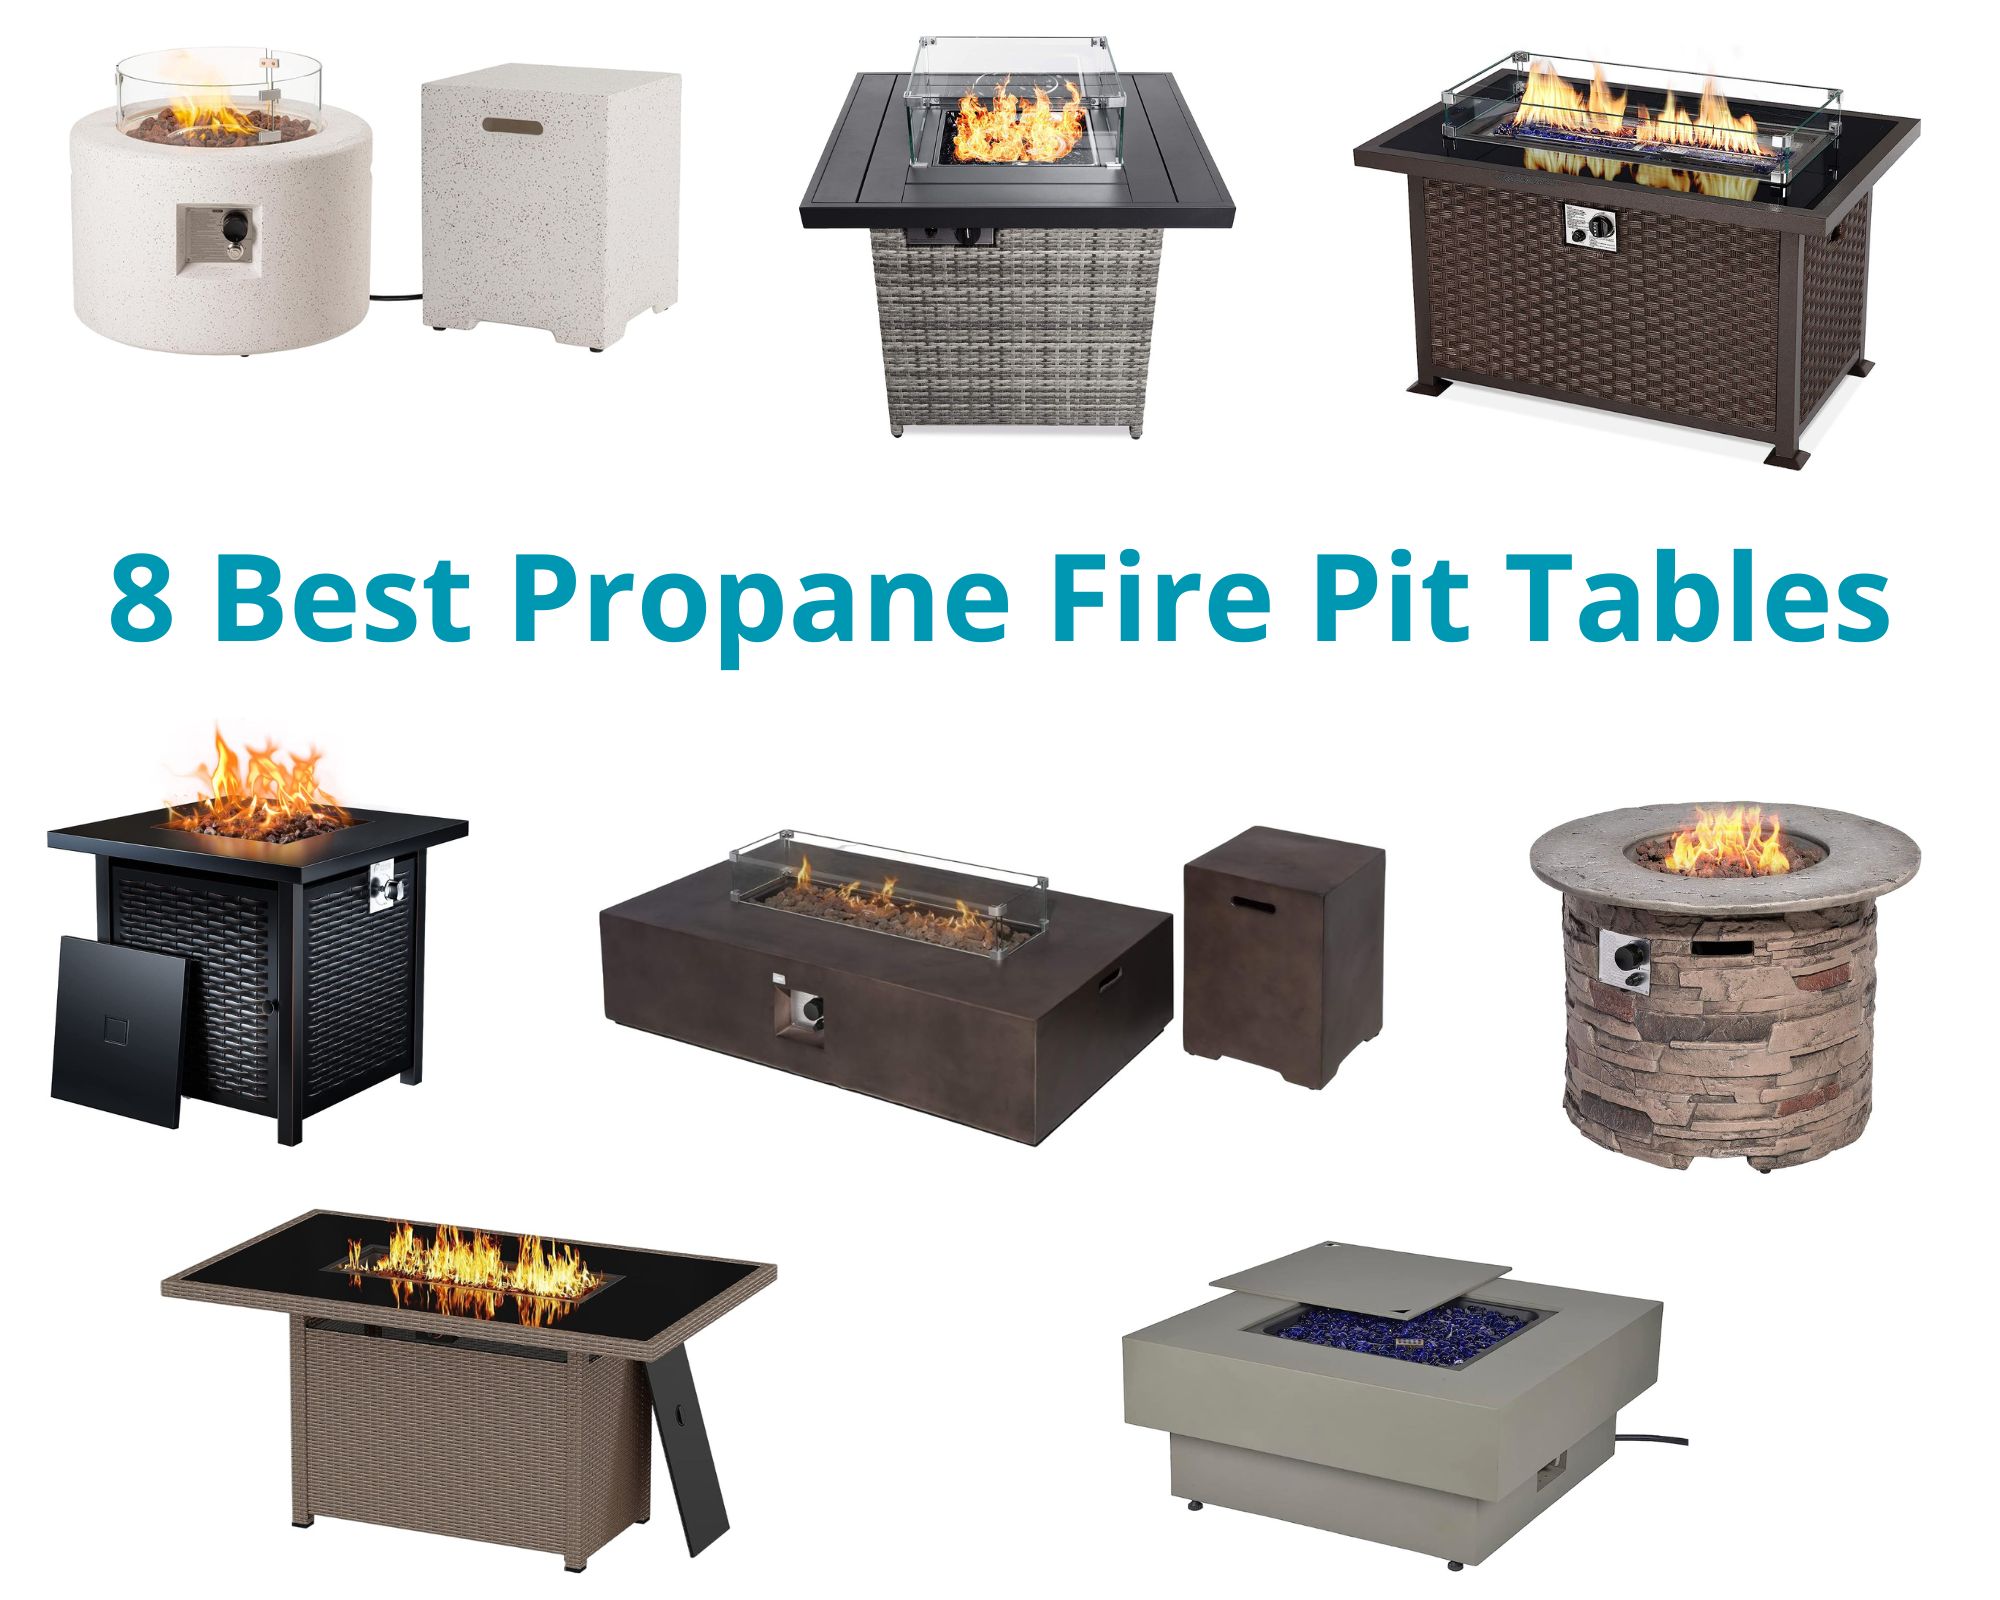 8 Best Propane Fire Pit Tables